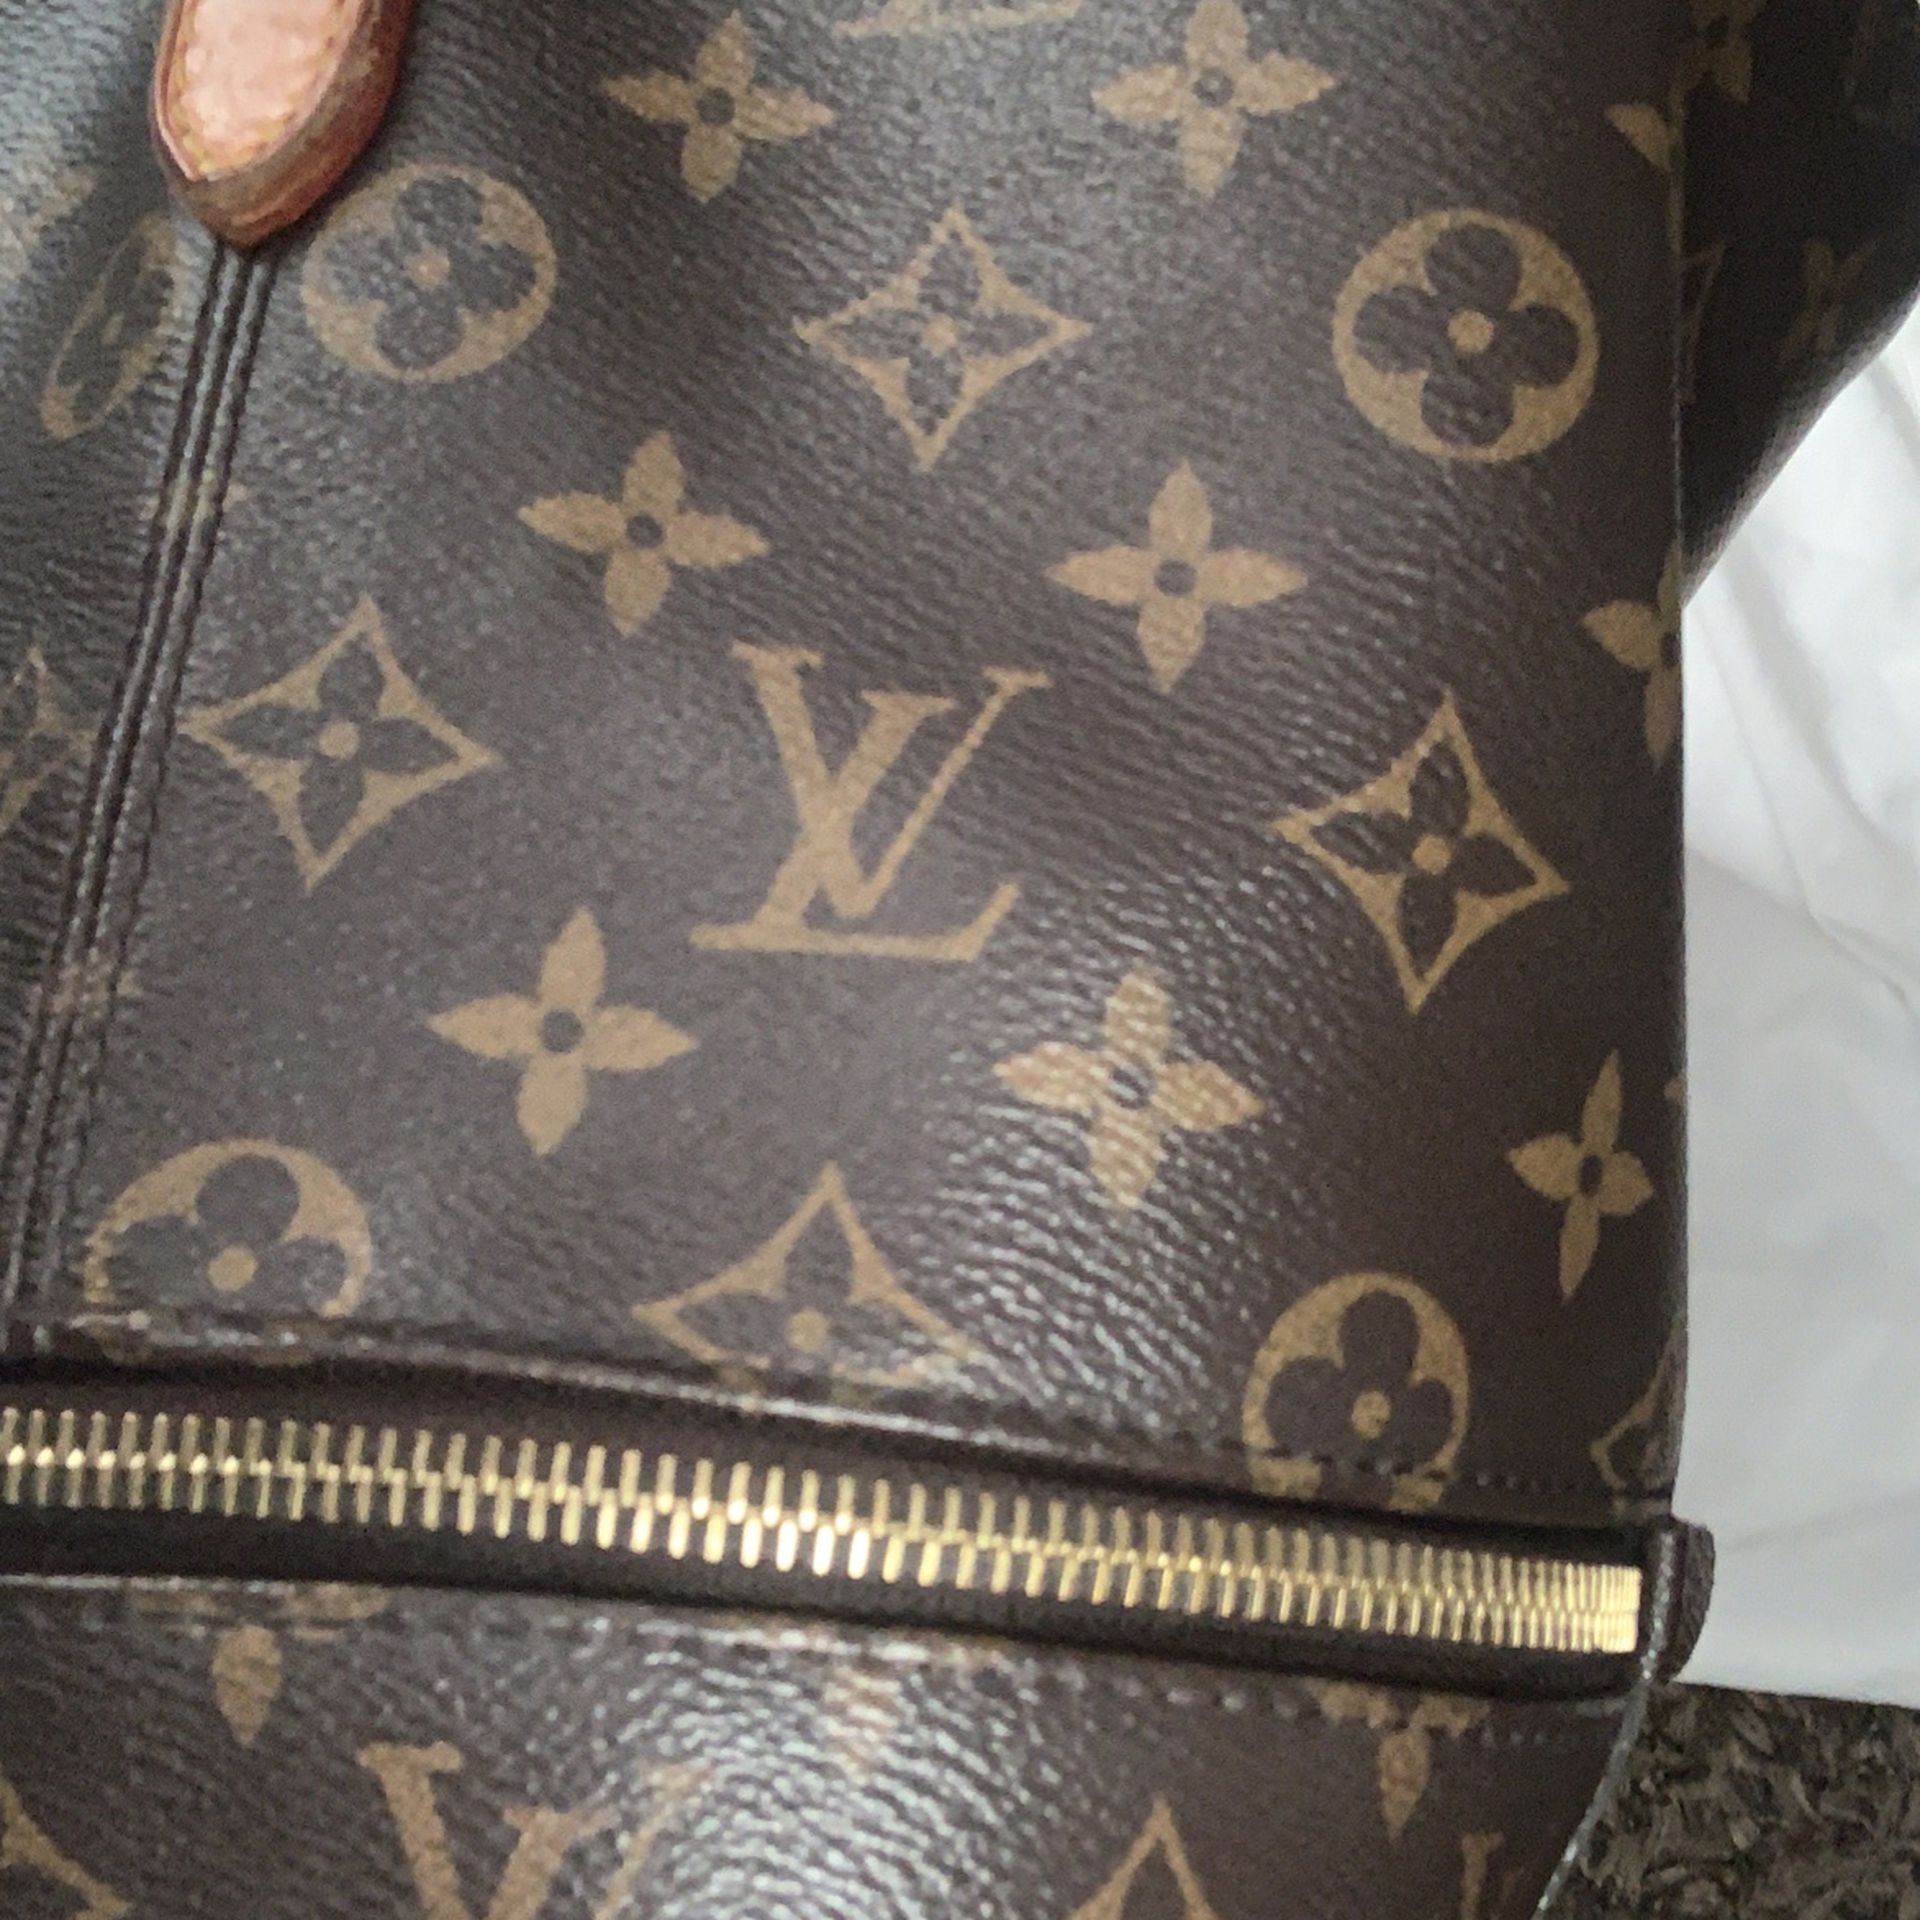 Used LOUIS VUITTON PARIS PURSE $1300.00 for Sale in Covina, CA - OfferUp